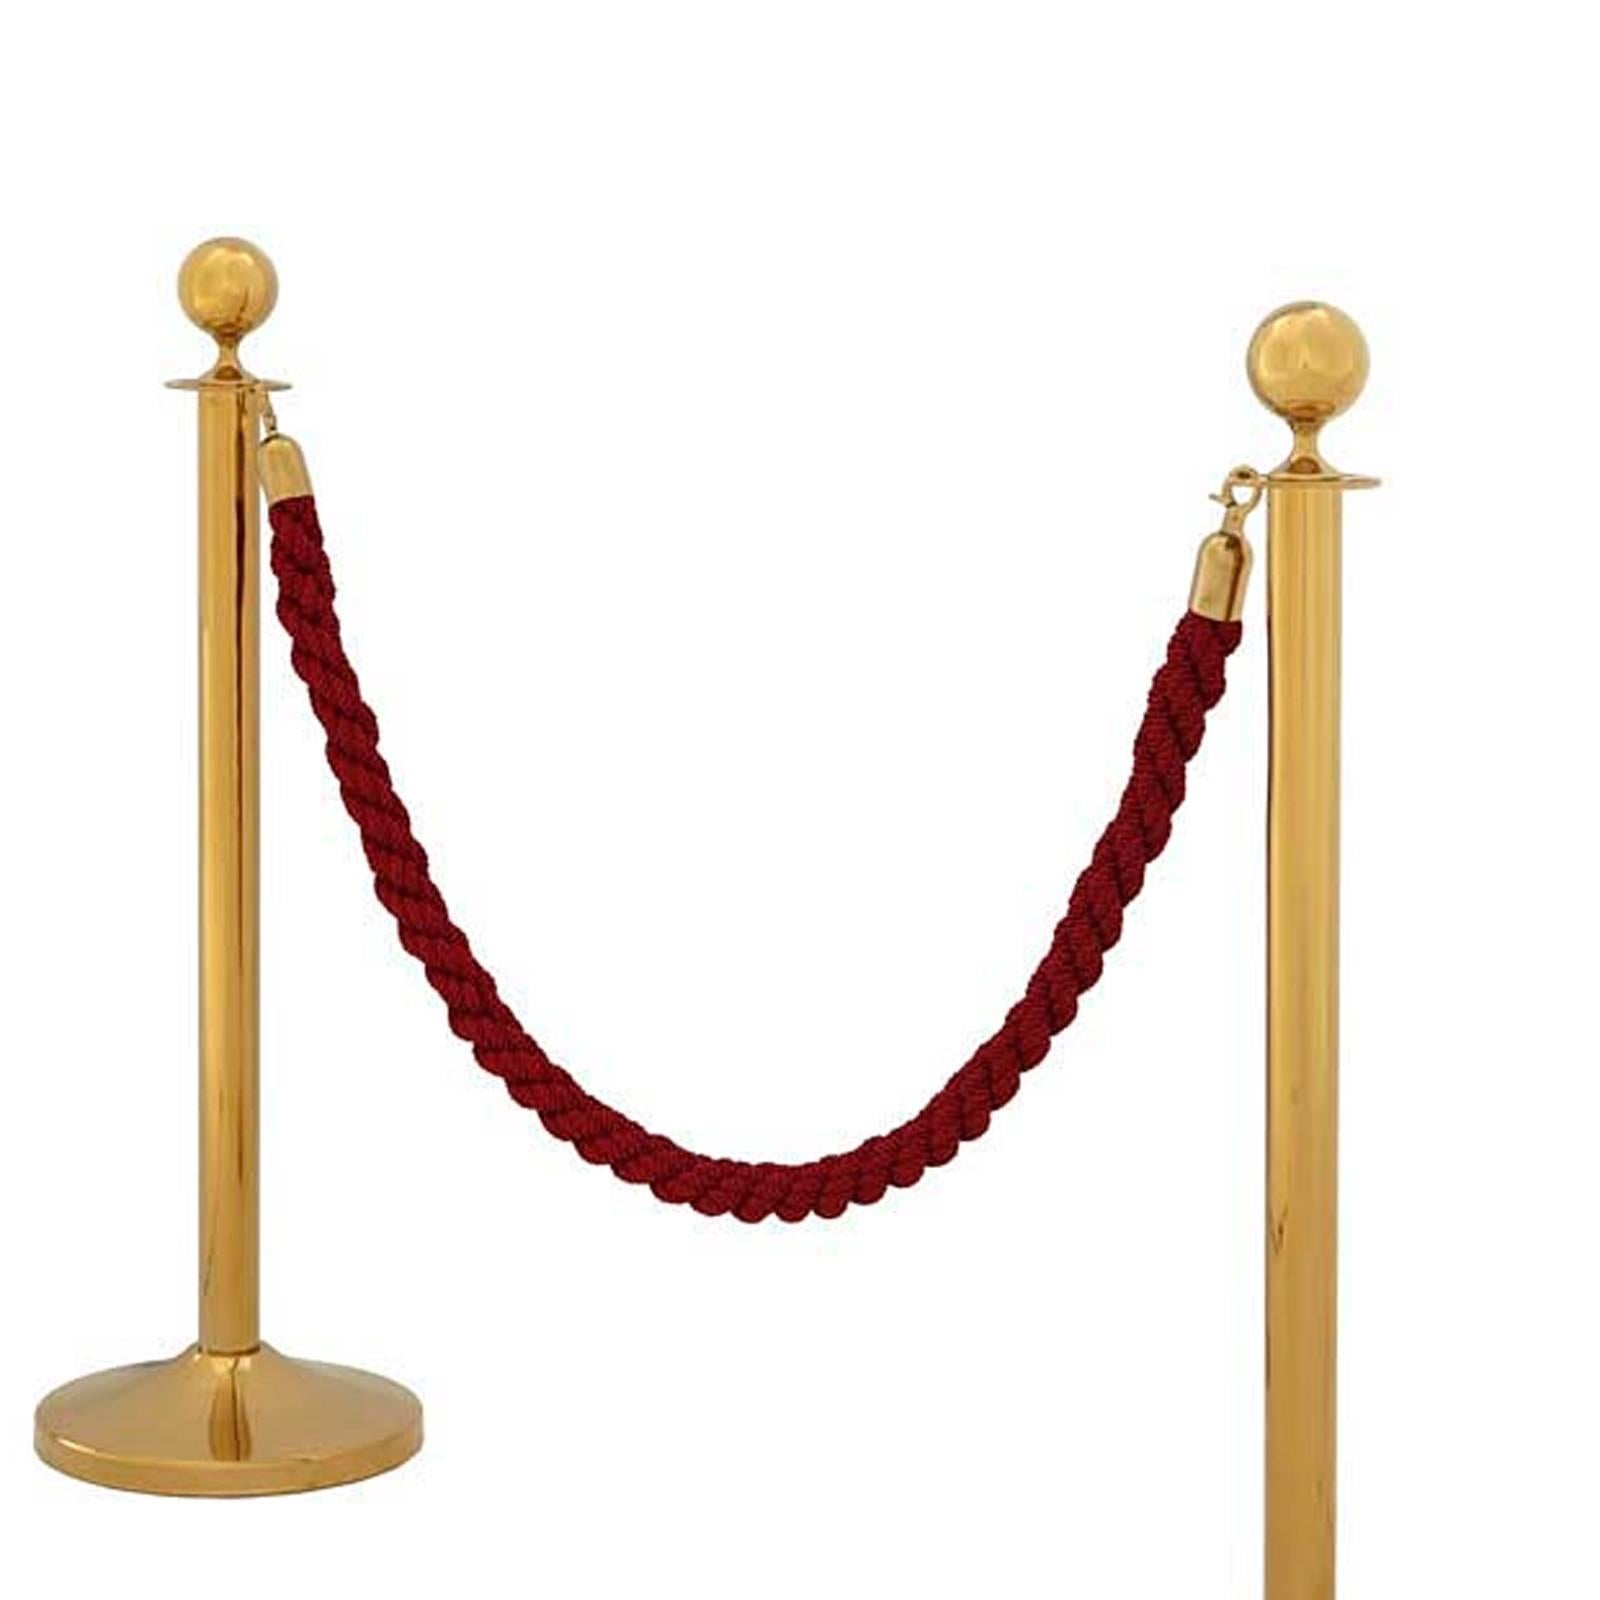 Post VIP in gold finish with red nylon cord,
also available in polished stainless steel, set
of two with black cord. For indoor-outdoor use.
Cord dimension: Ø4x150cm.
